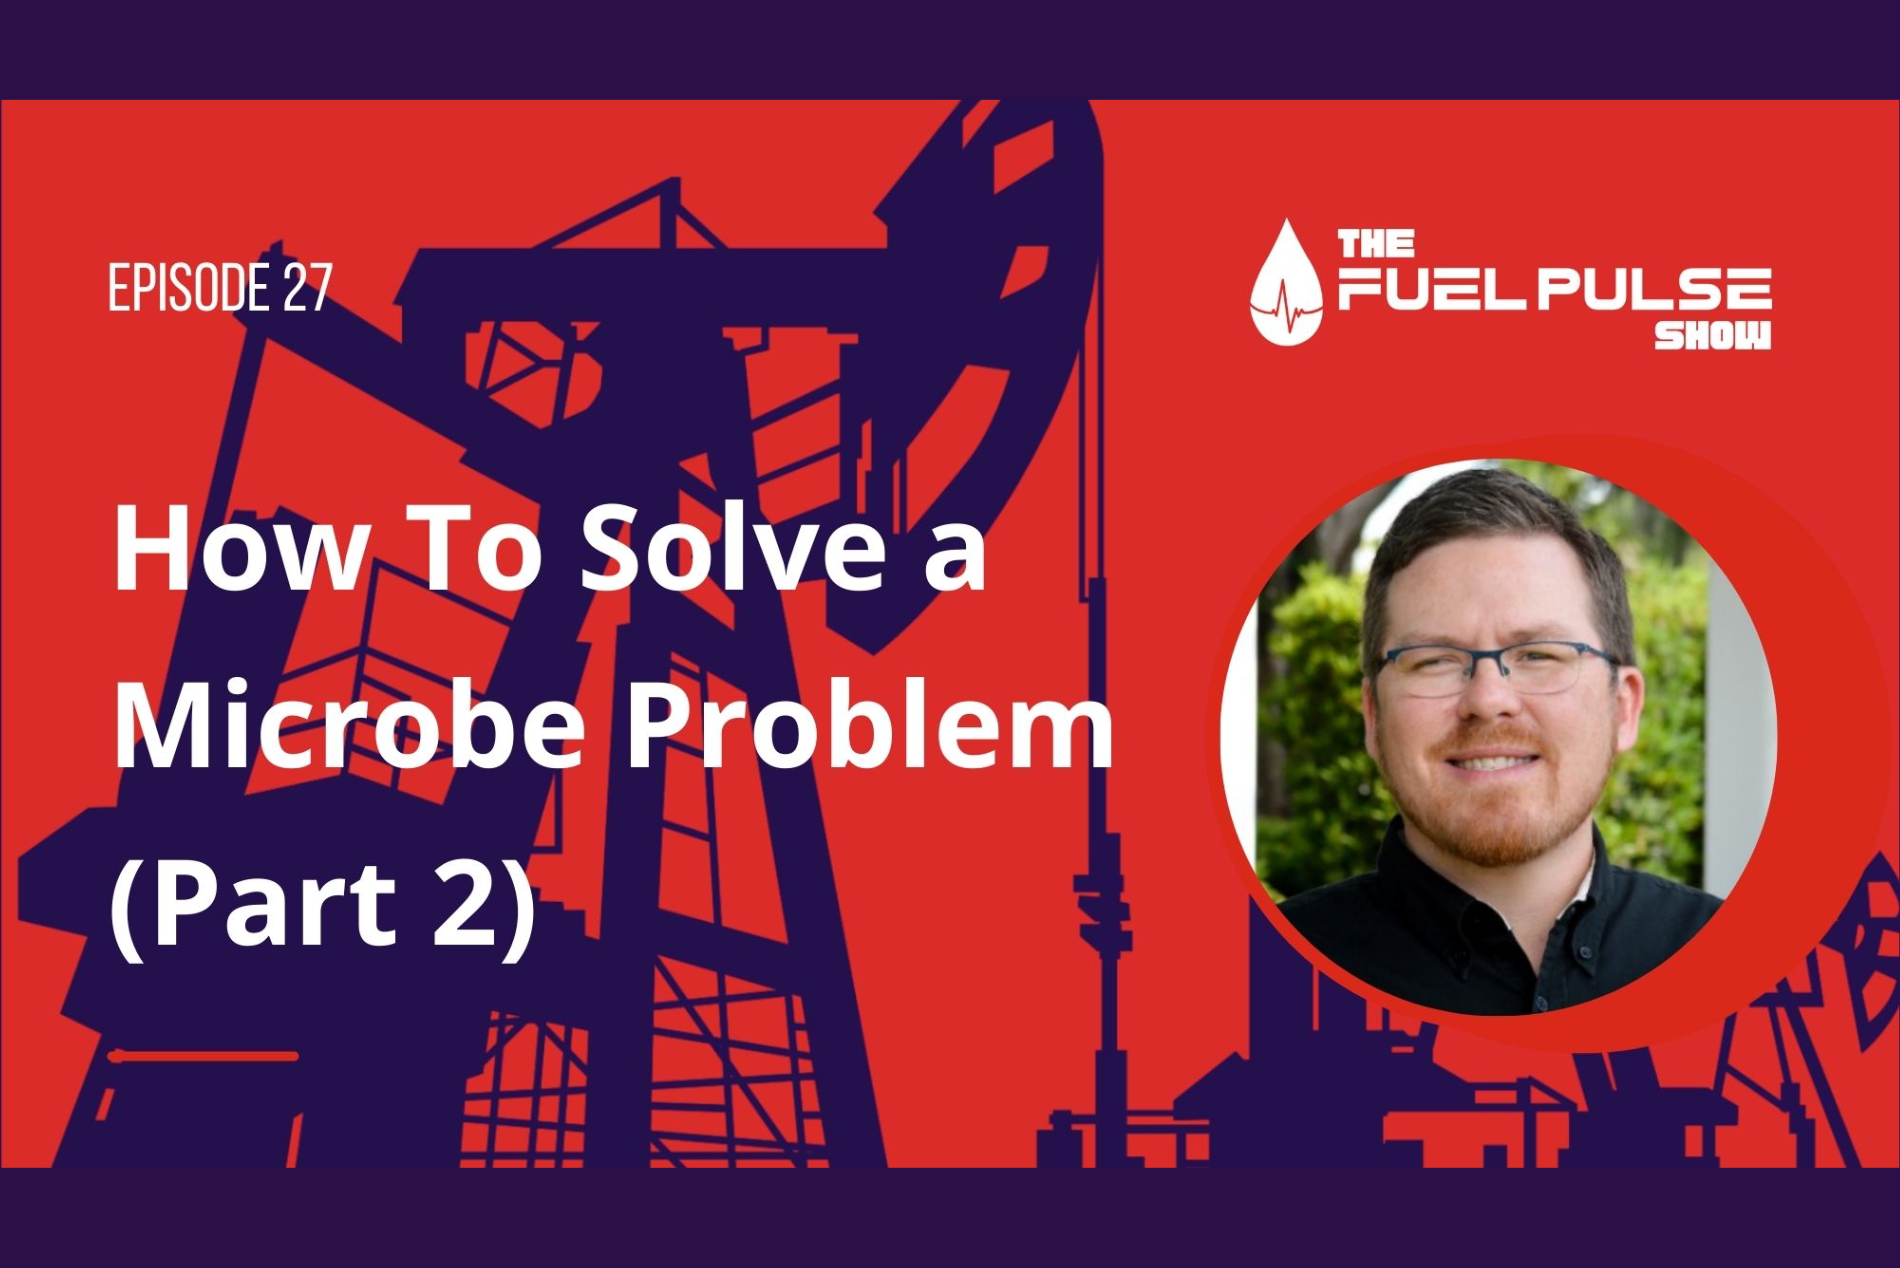 Episode 027 - How To Solve a Microbe Problem (Part 2)